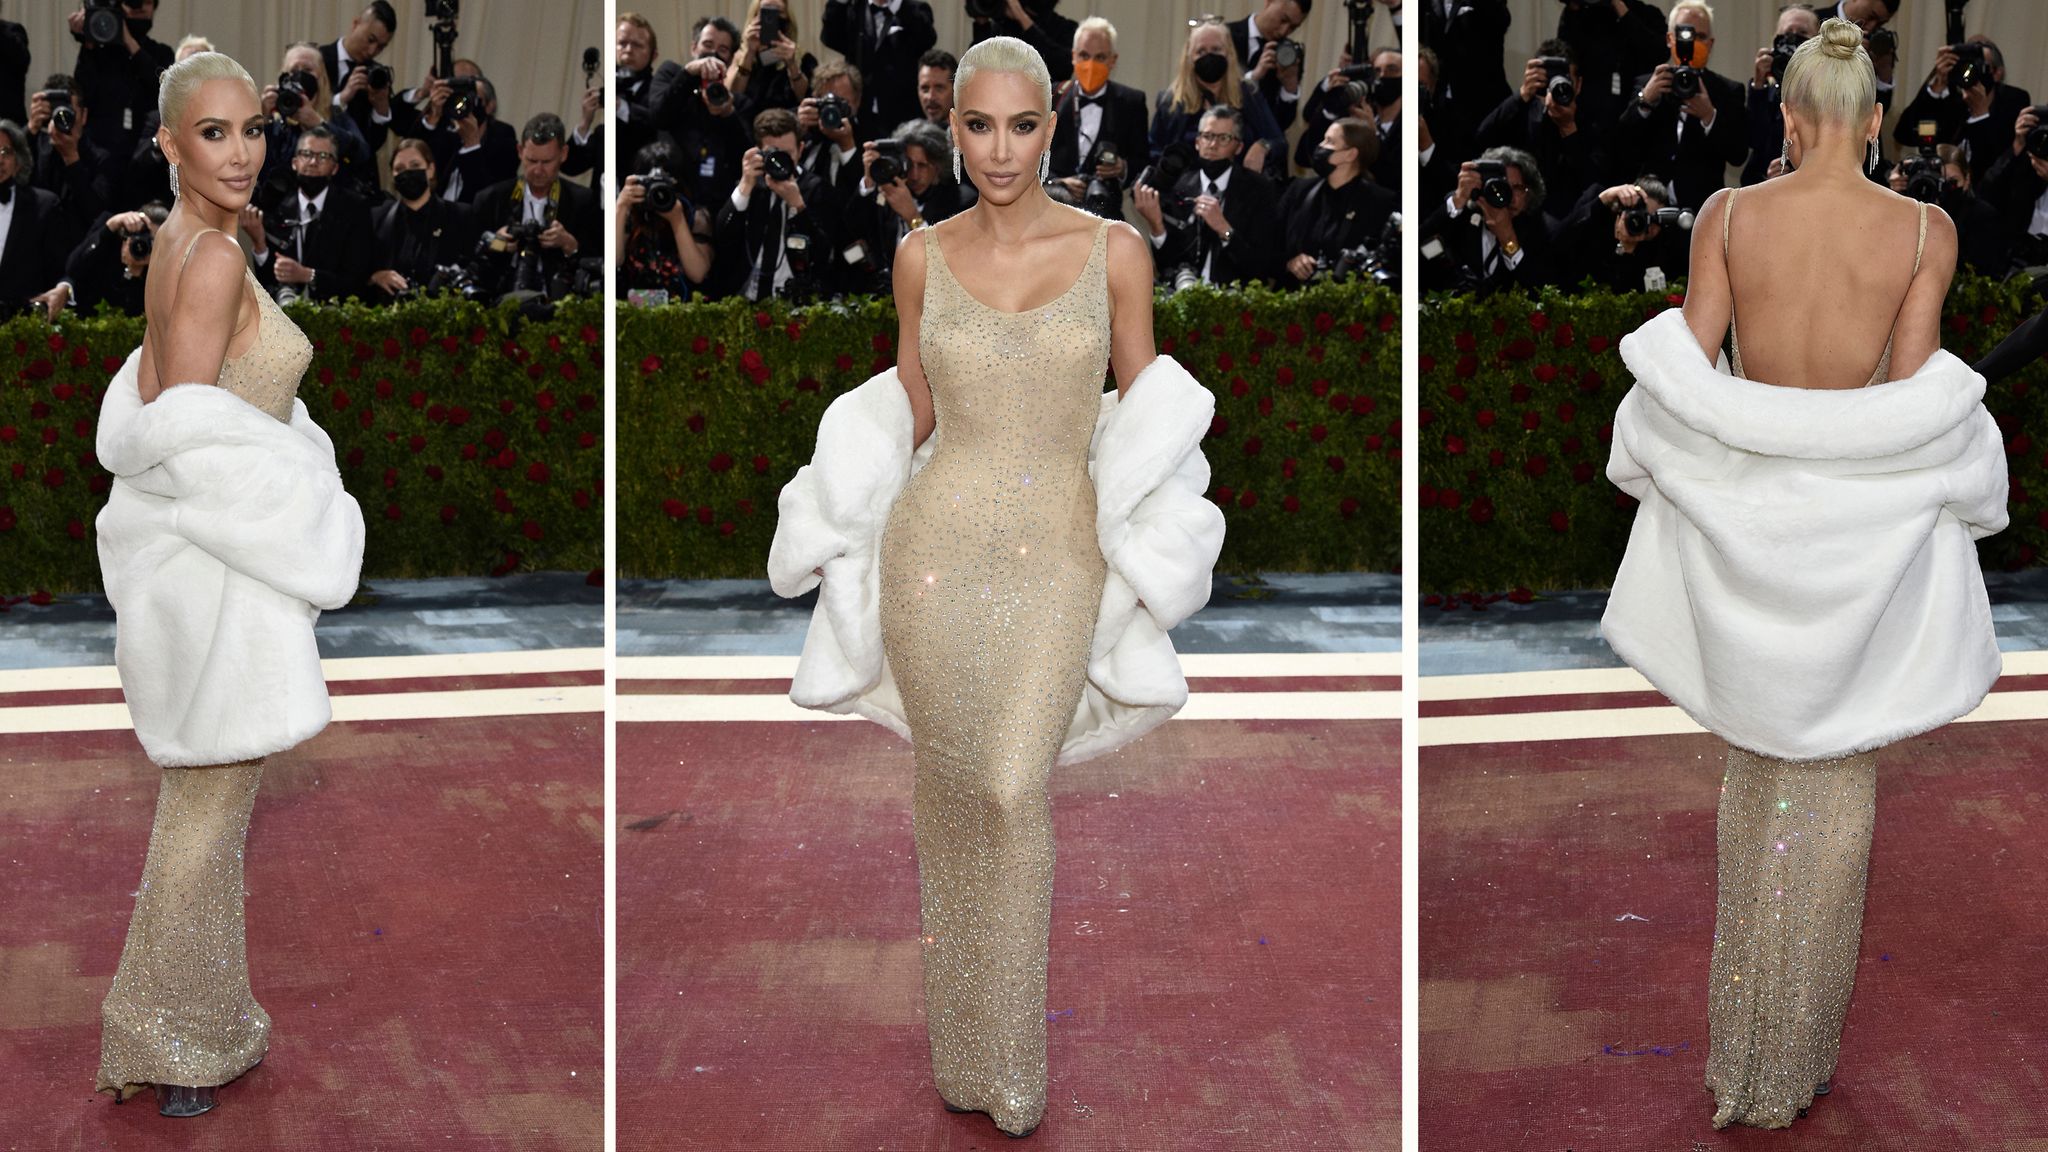 Kardashian fans think Kim wearing Marilyn Monroe's dress at Met Gala  'caused DRASTIC change in dollar value' of $5M gown | The Sun